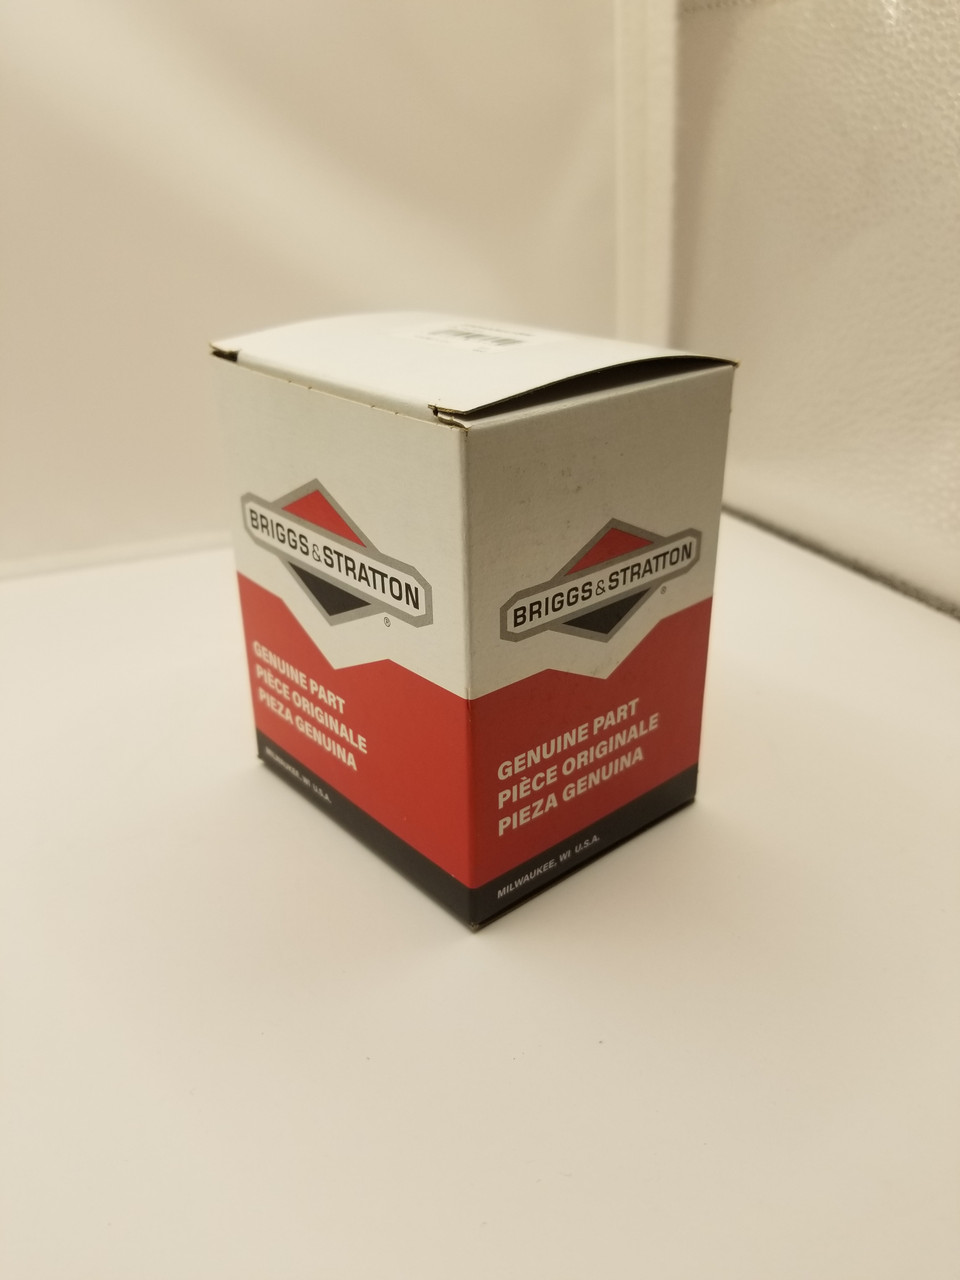 ENGINE PACKED SINGLE CARTON - 40T877-0006-G1 package std